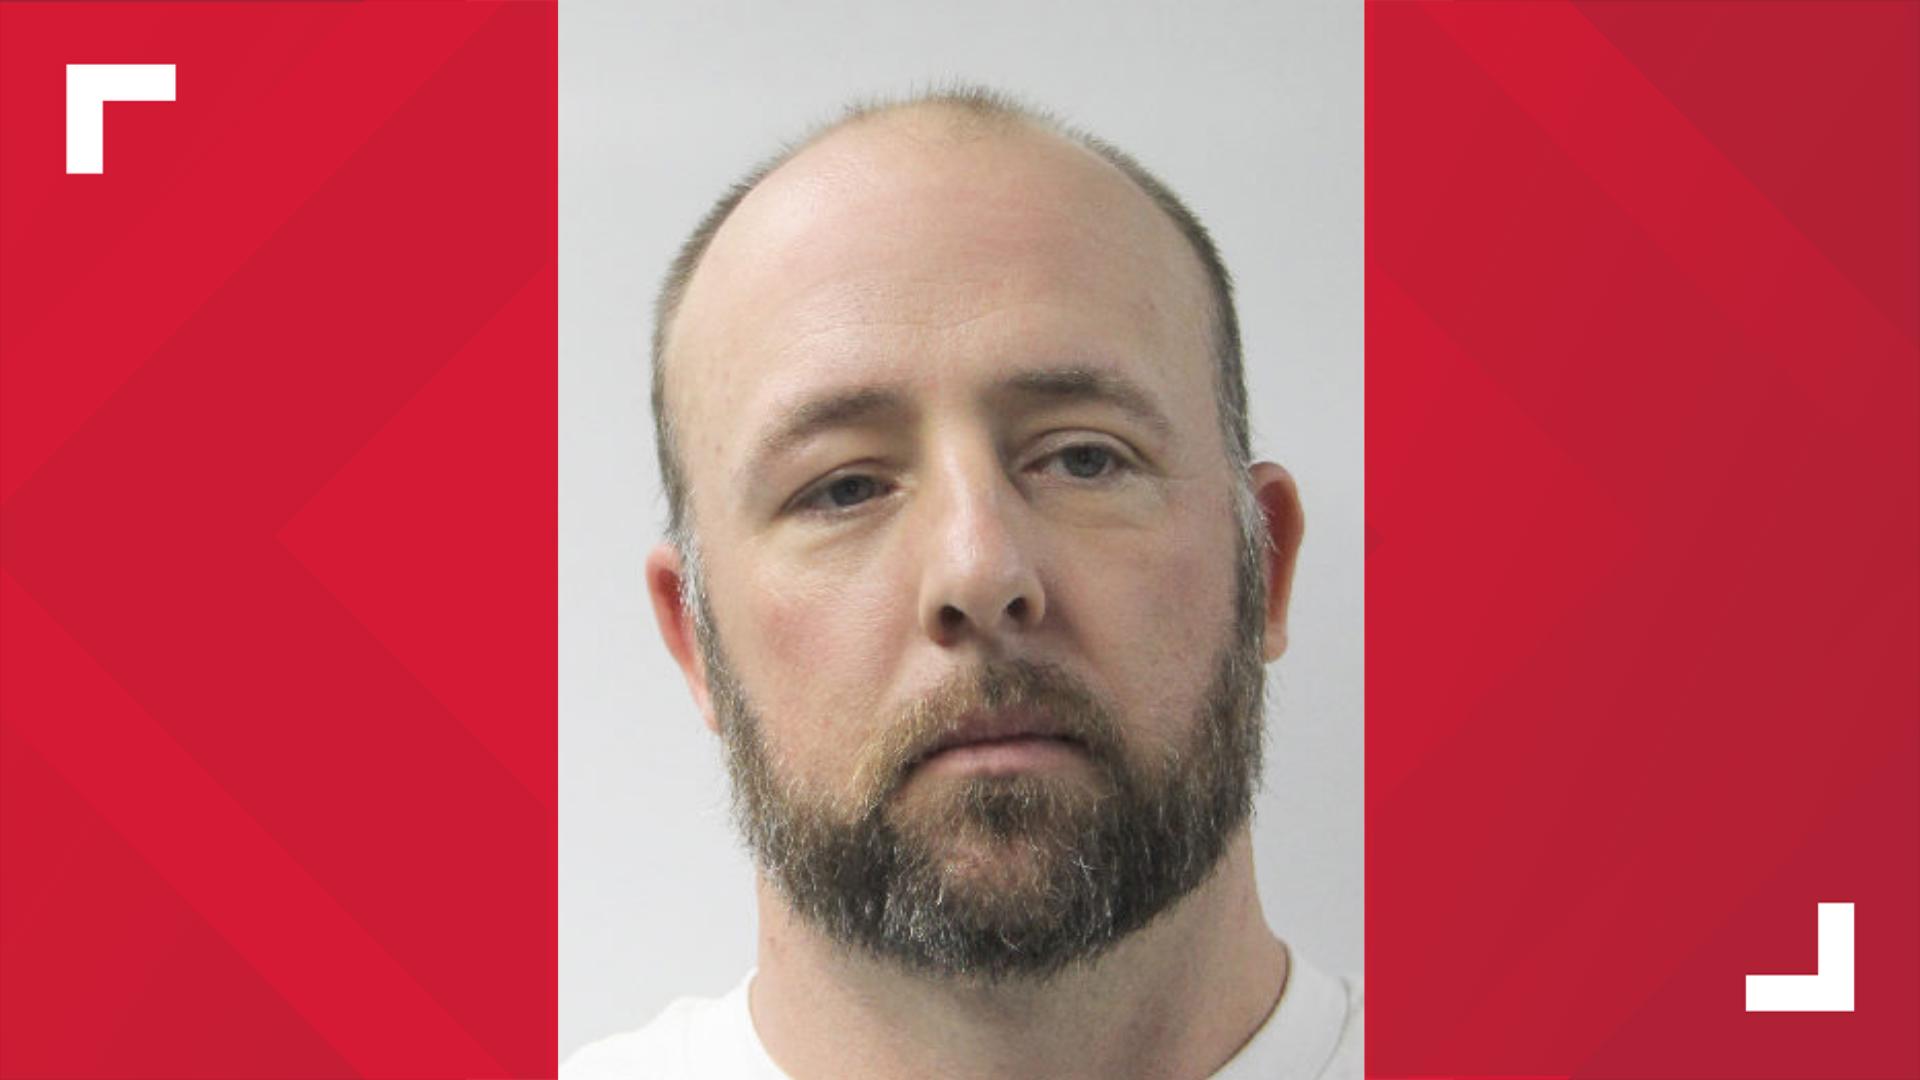 The DA for St. Tammany Parish says 39-year-old Brandon Applewhite pleaded guilty to two charges.